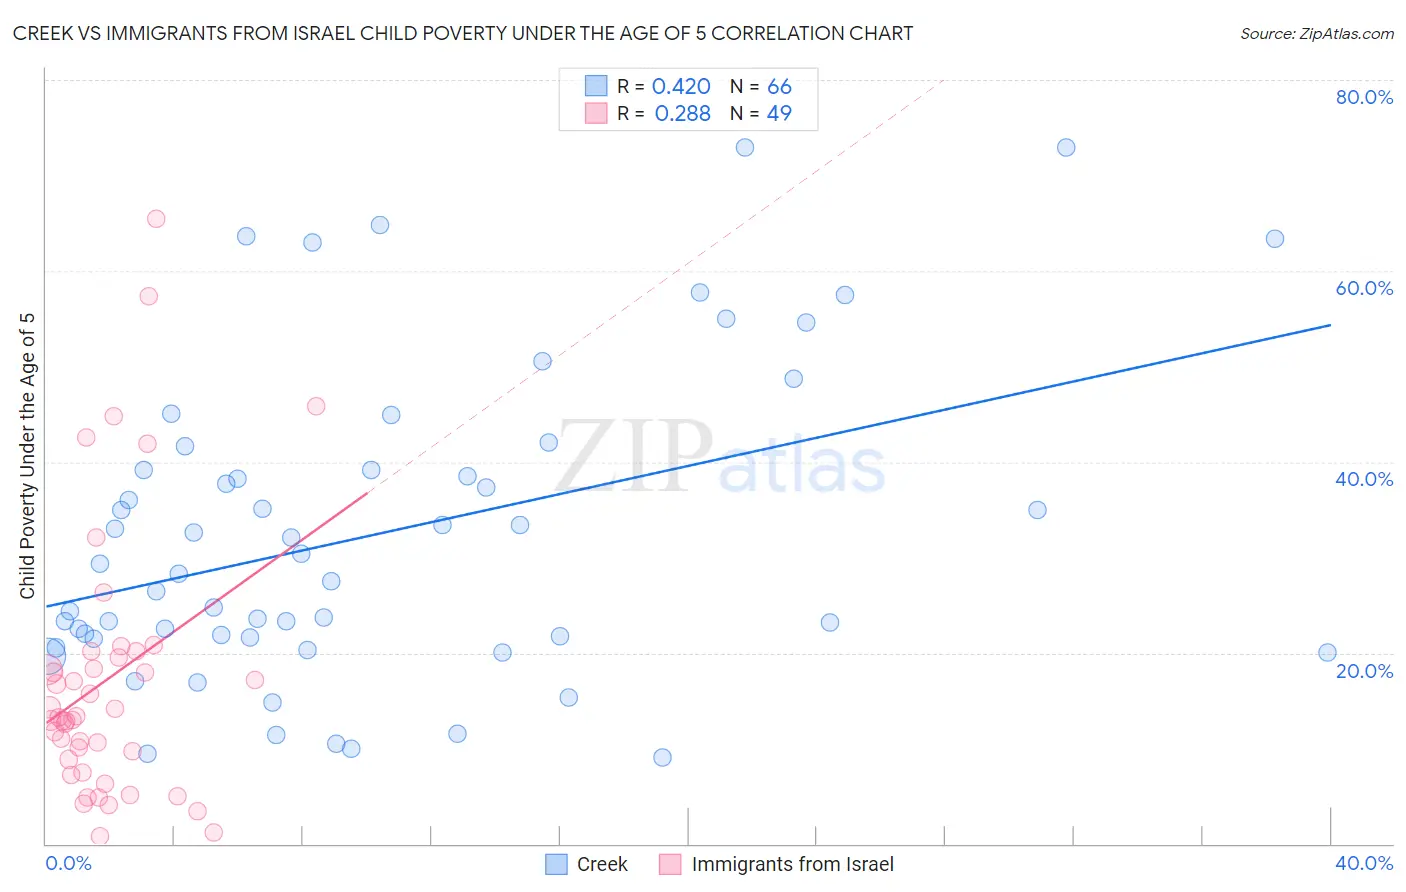 Creek vs Immigrants from Israel Child Poverty Under the Age of 5